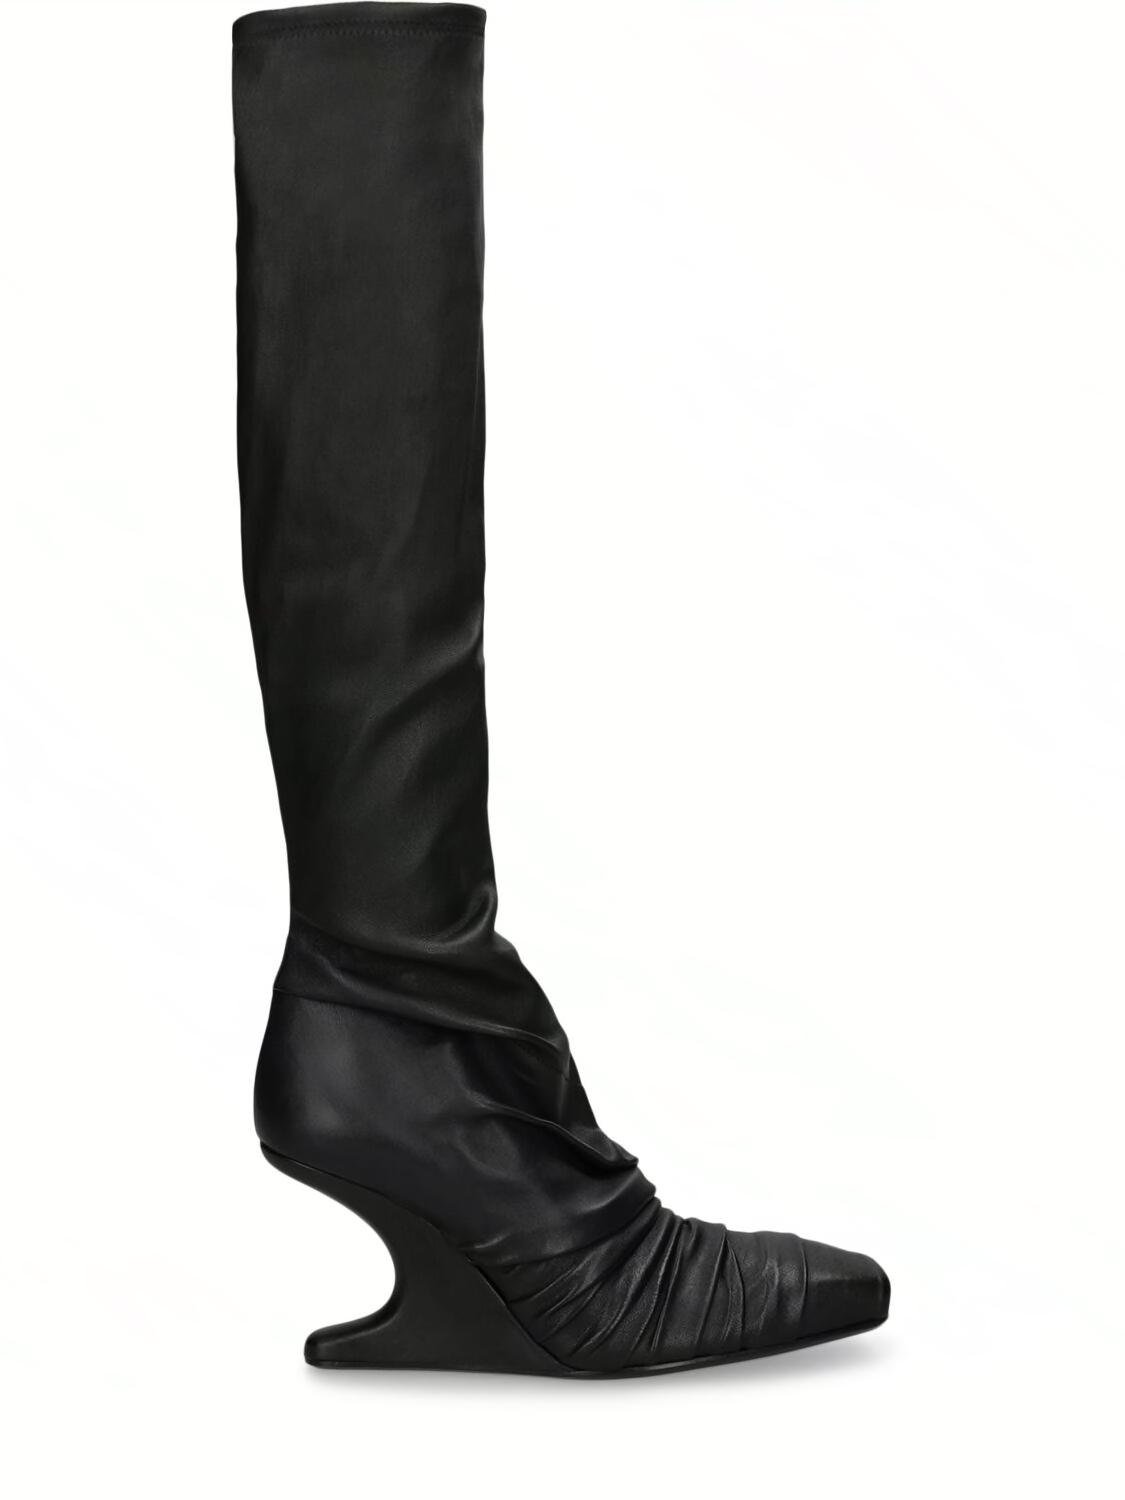 80mm Cantilever Leather Tall Boots by RICK OWENS